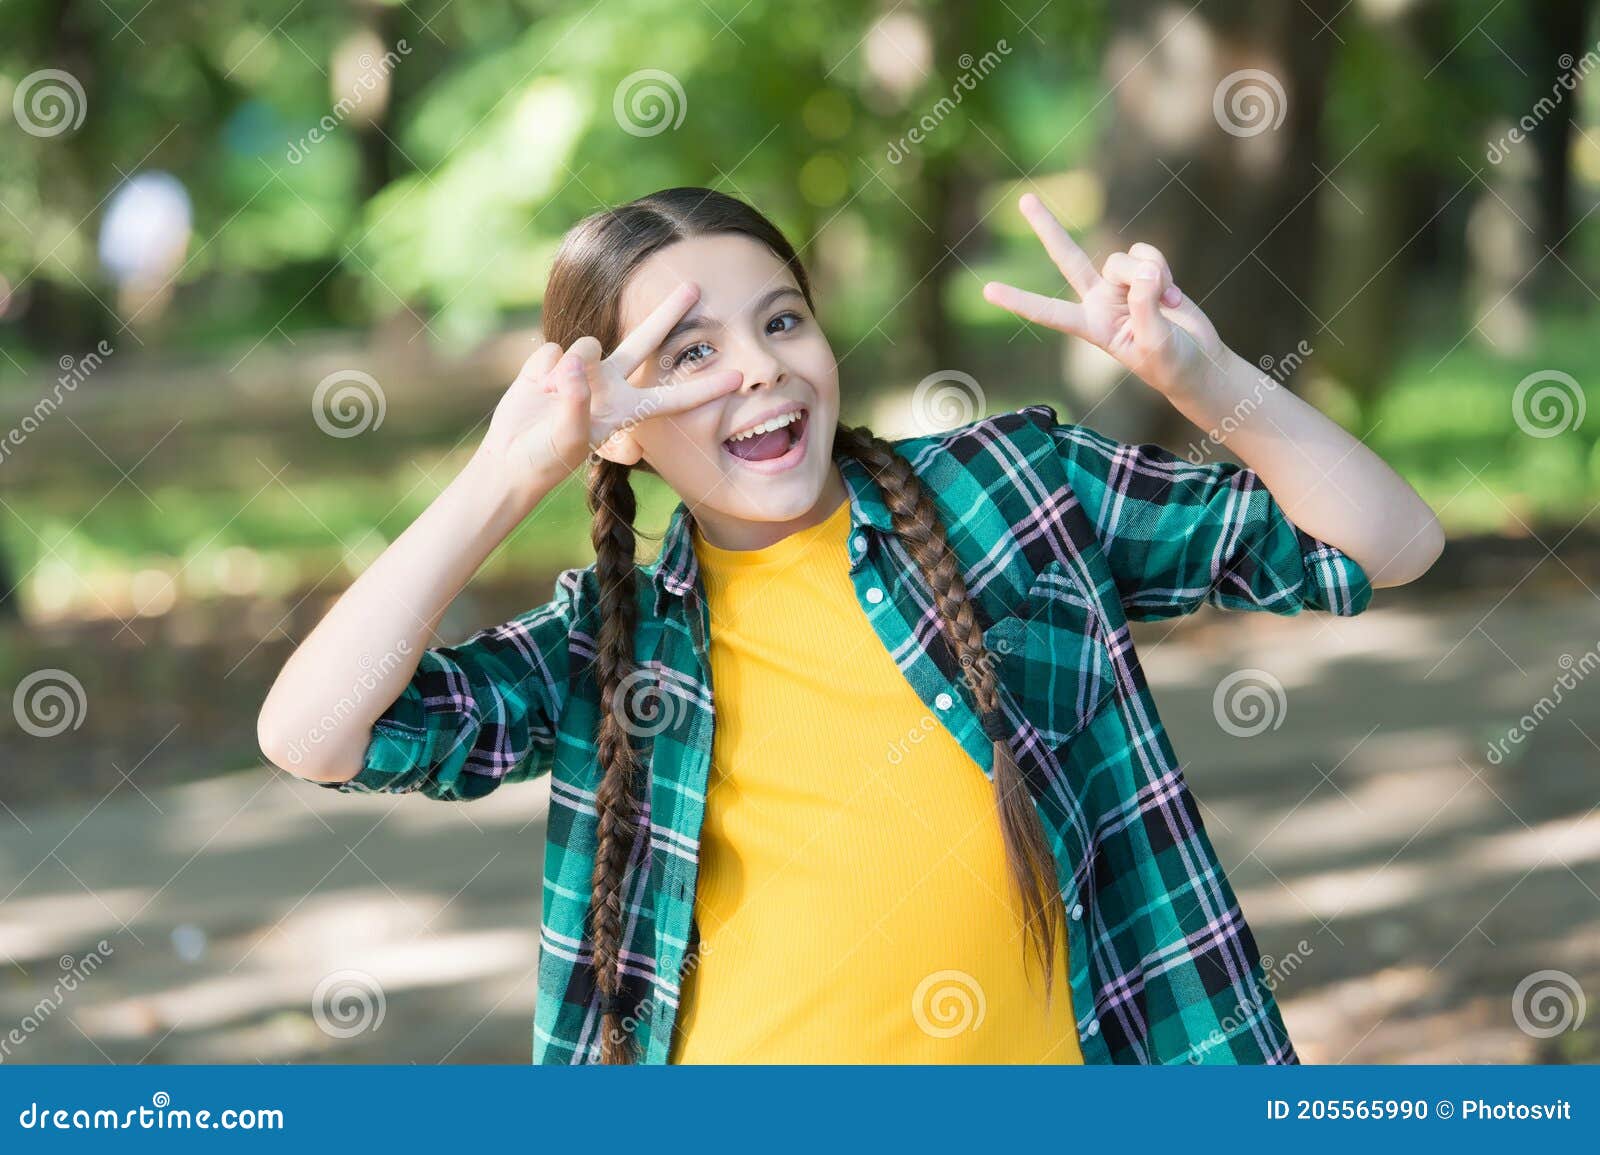 Keeping Cool. Cool Girl Show Peace Signs Natural Landscape. Summer  Vacation. Casual Fashion Style. Beauty Look Stock Photo - Image of nature,  outdoors: 205565990